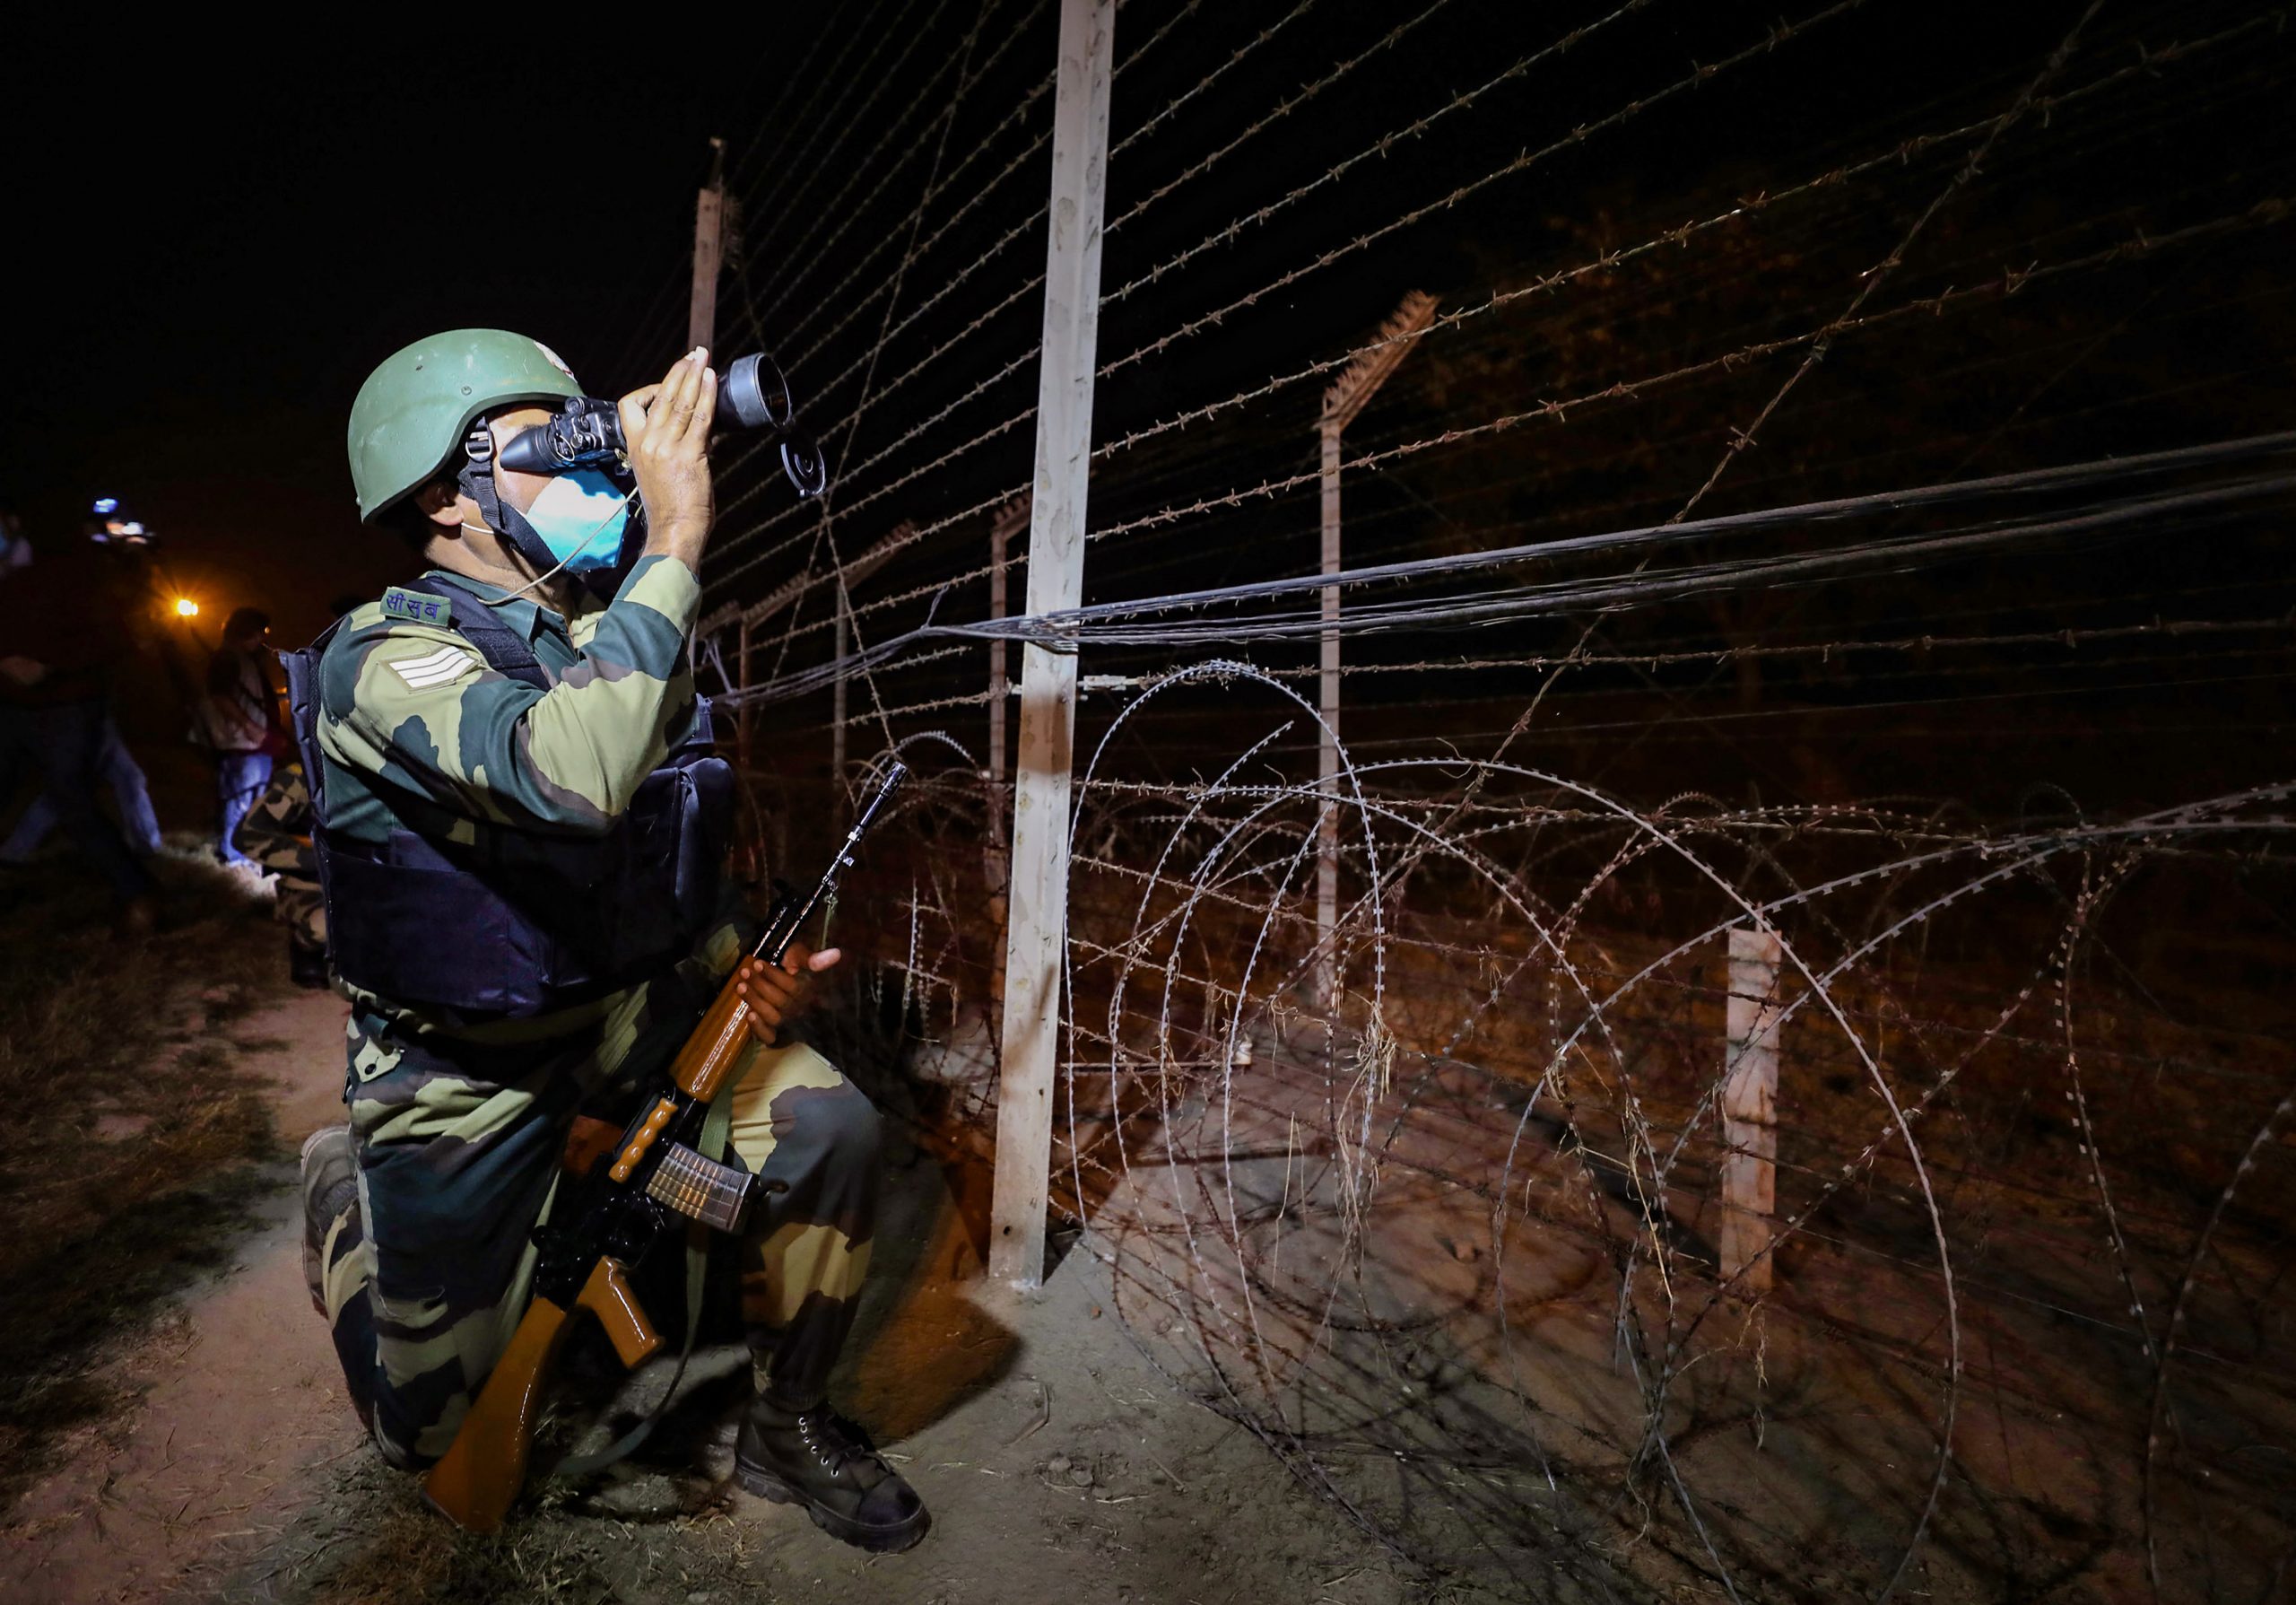 BSF sends back an 8-year-old Pakistani boy who accidentally crossed borders